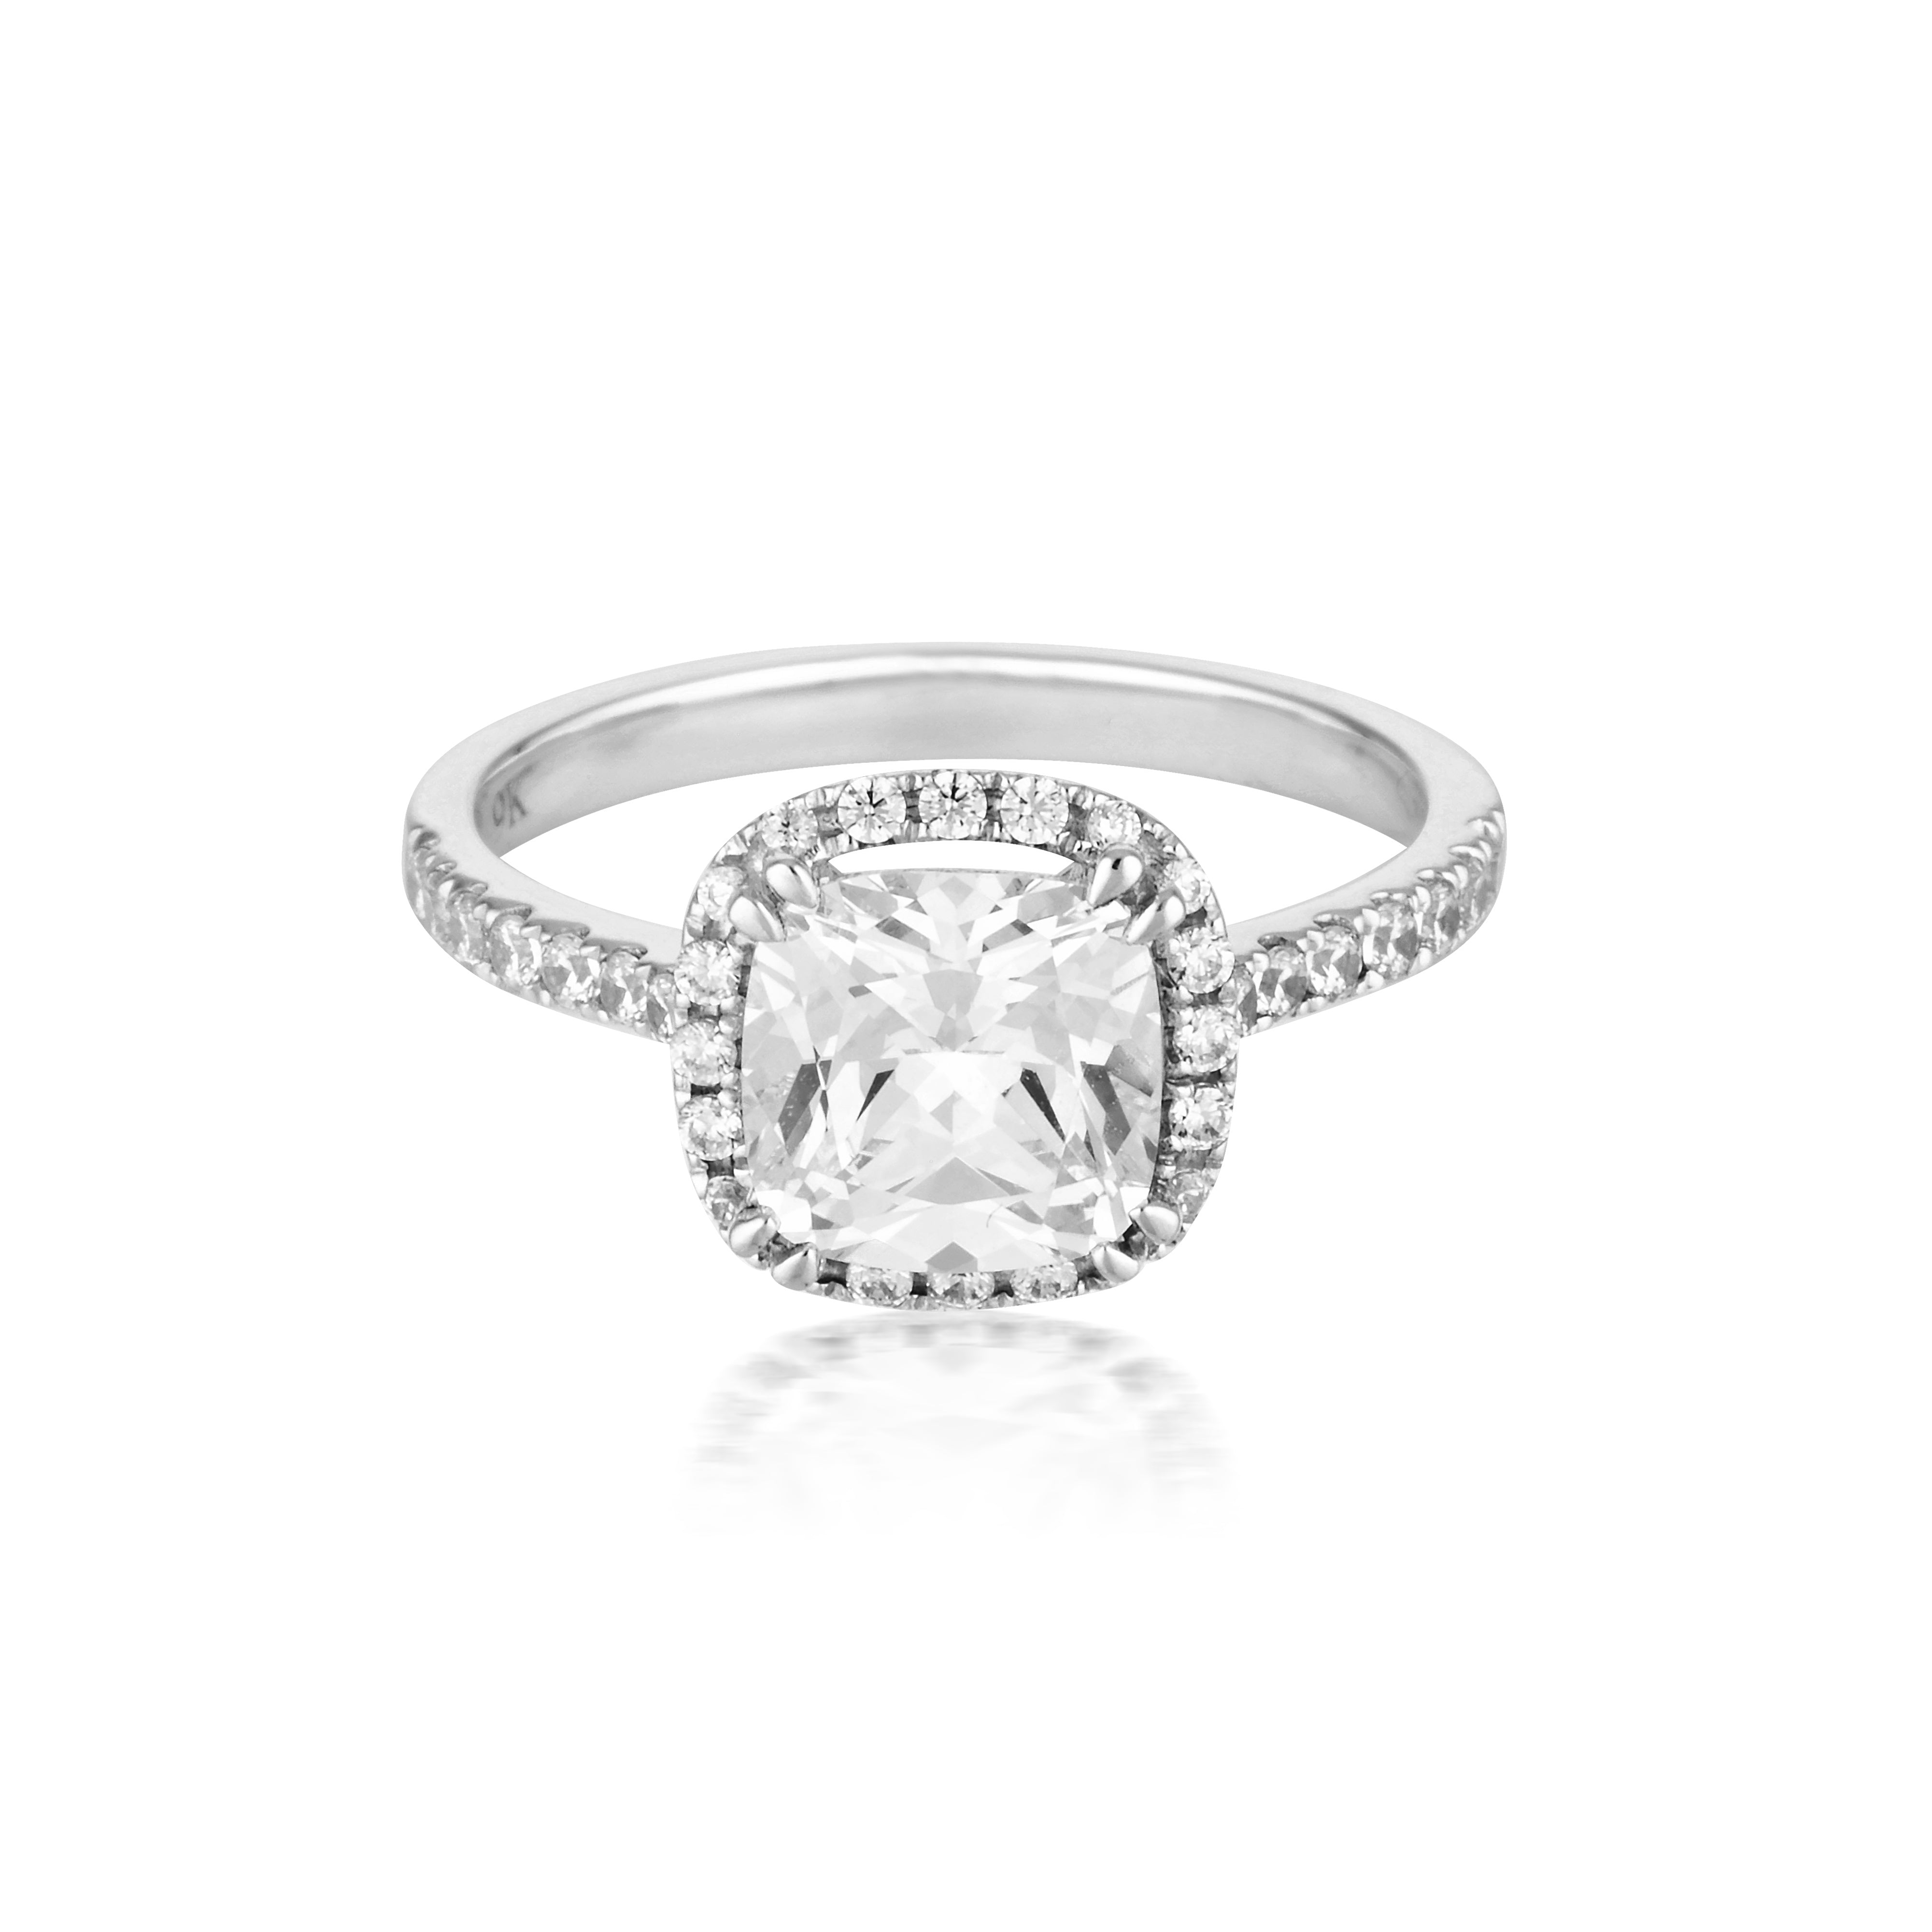 Cushion Cut Halo 1.5tcw Moissanite Engagement Ring in 9ct White Gold